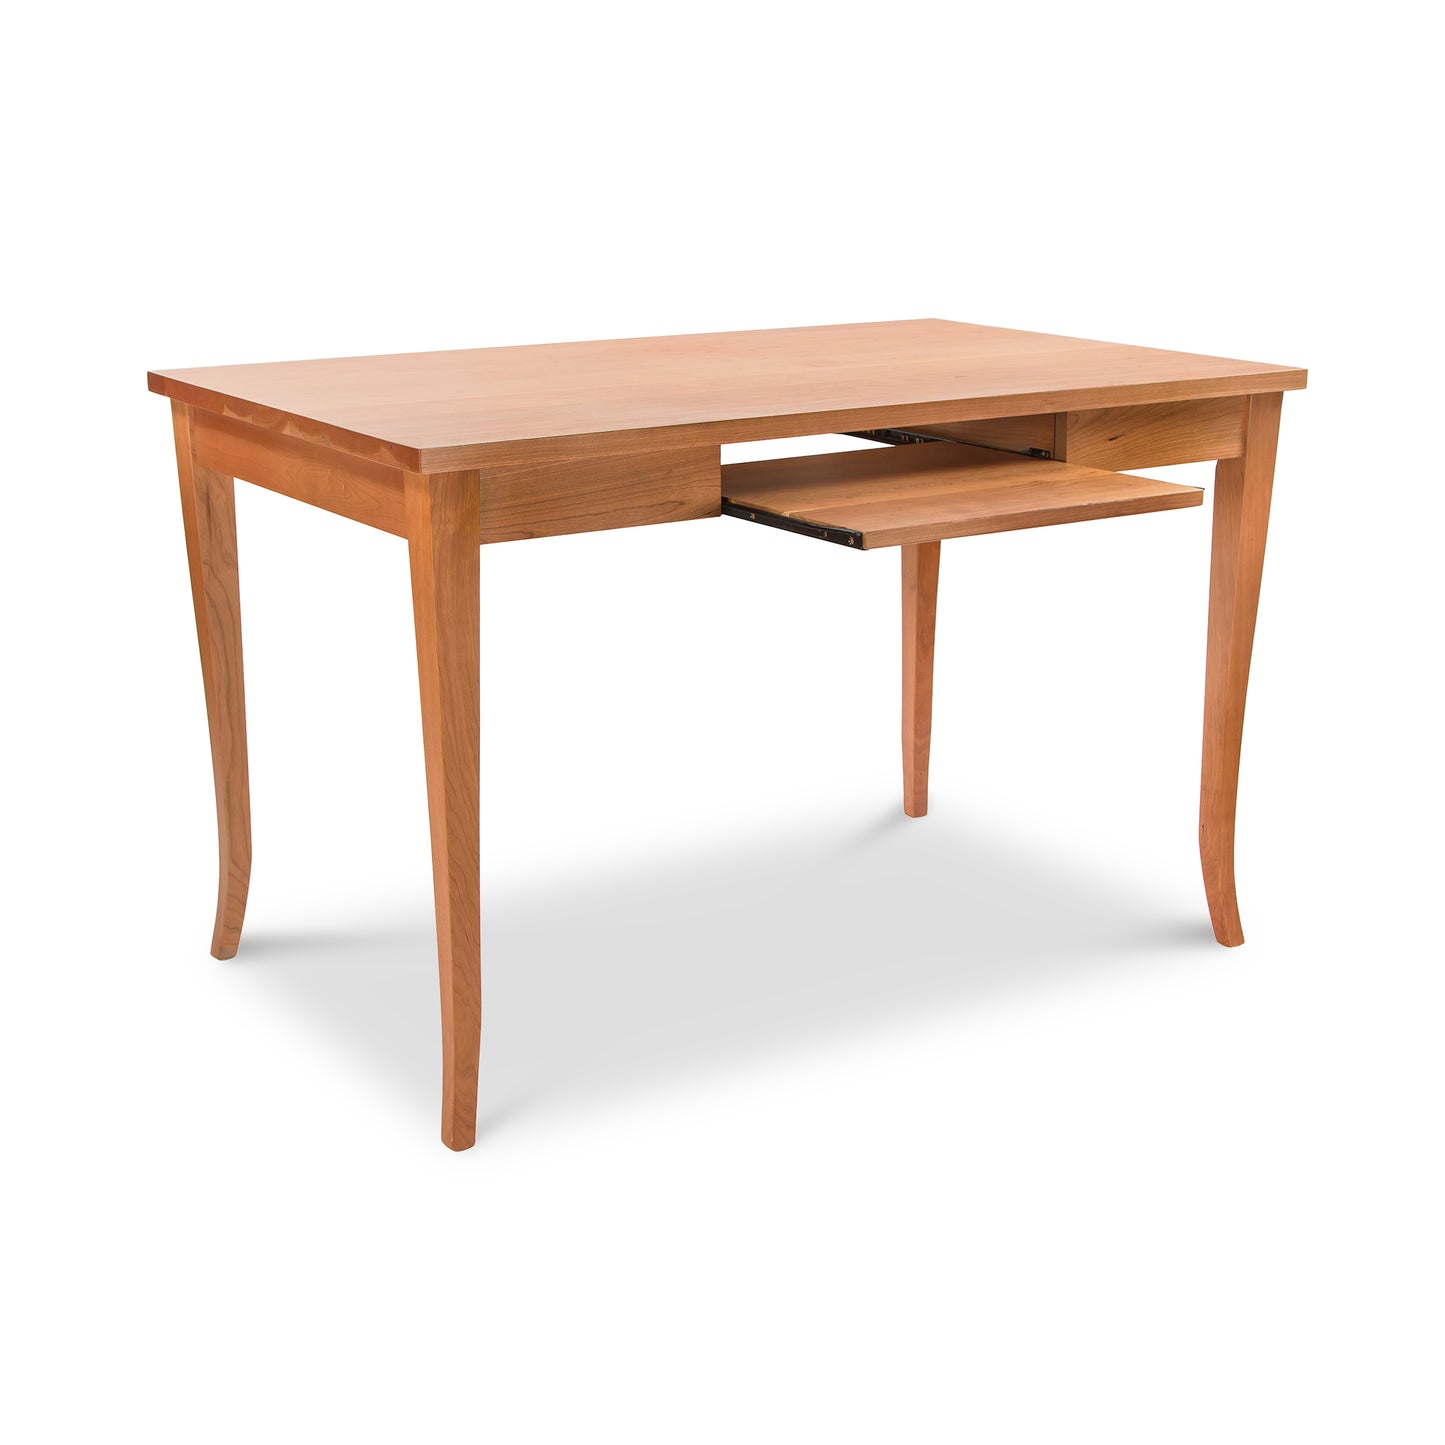 An eco-friendly Classic Shaker Flare Leg Writing Desk with a drawer made by Lyndon Furniture.